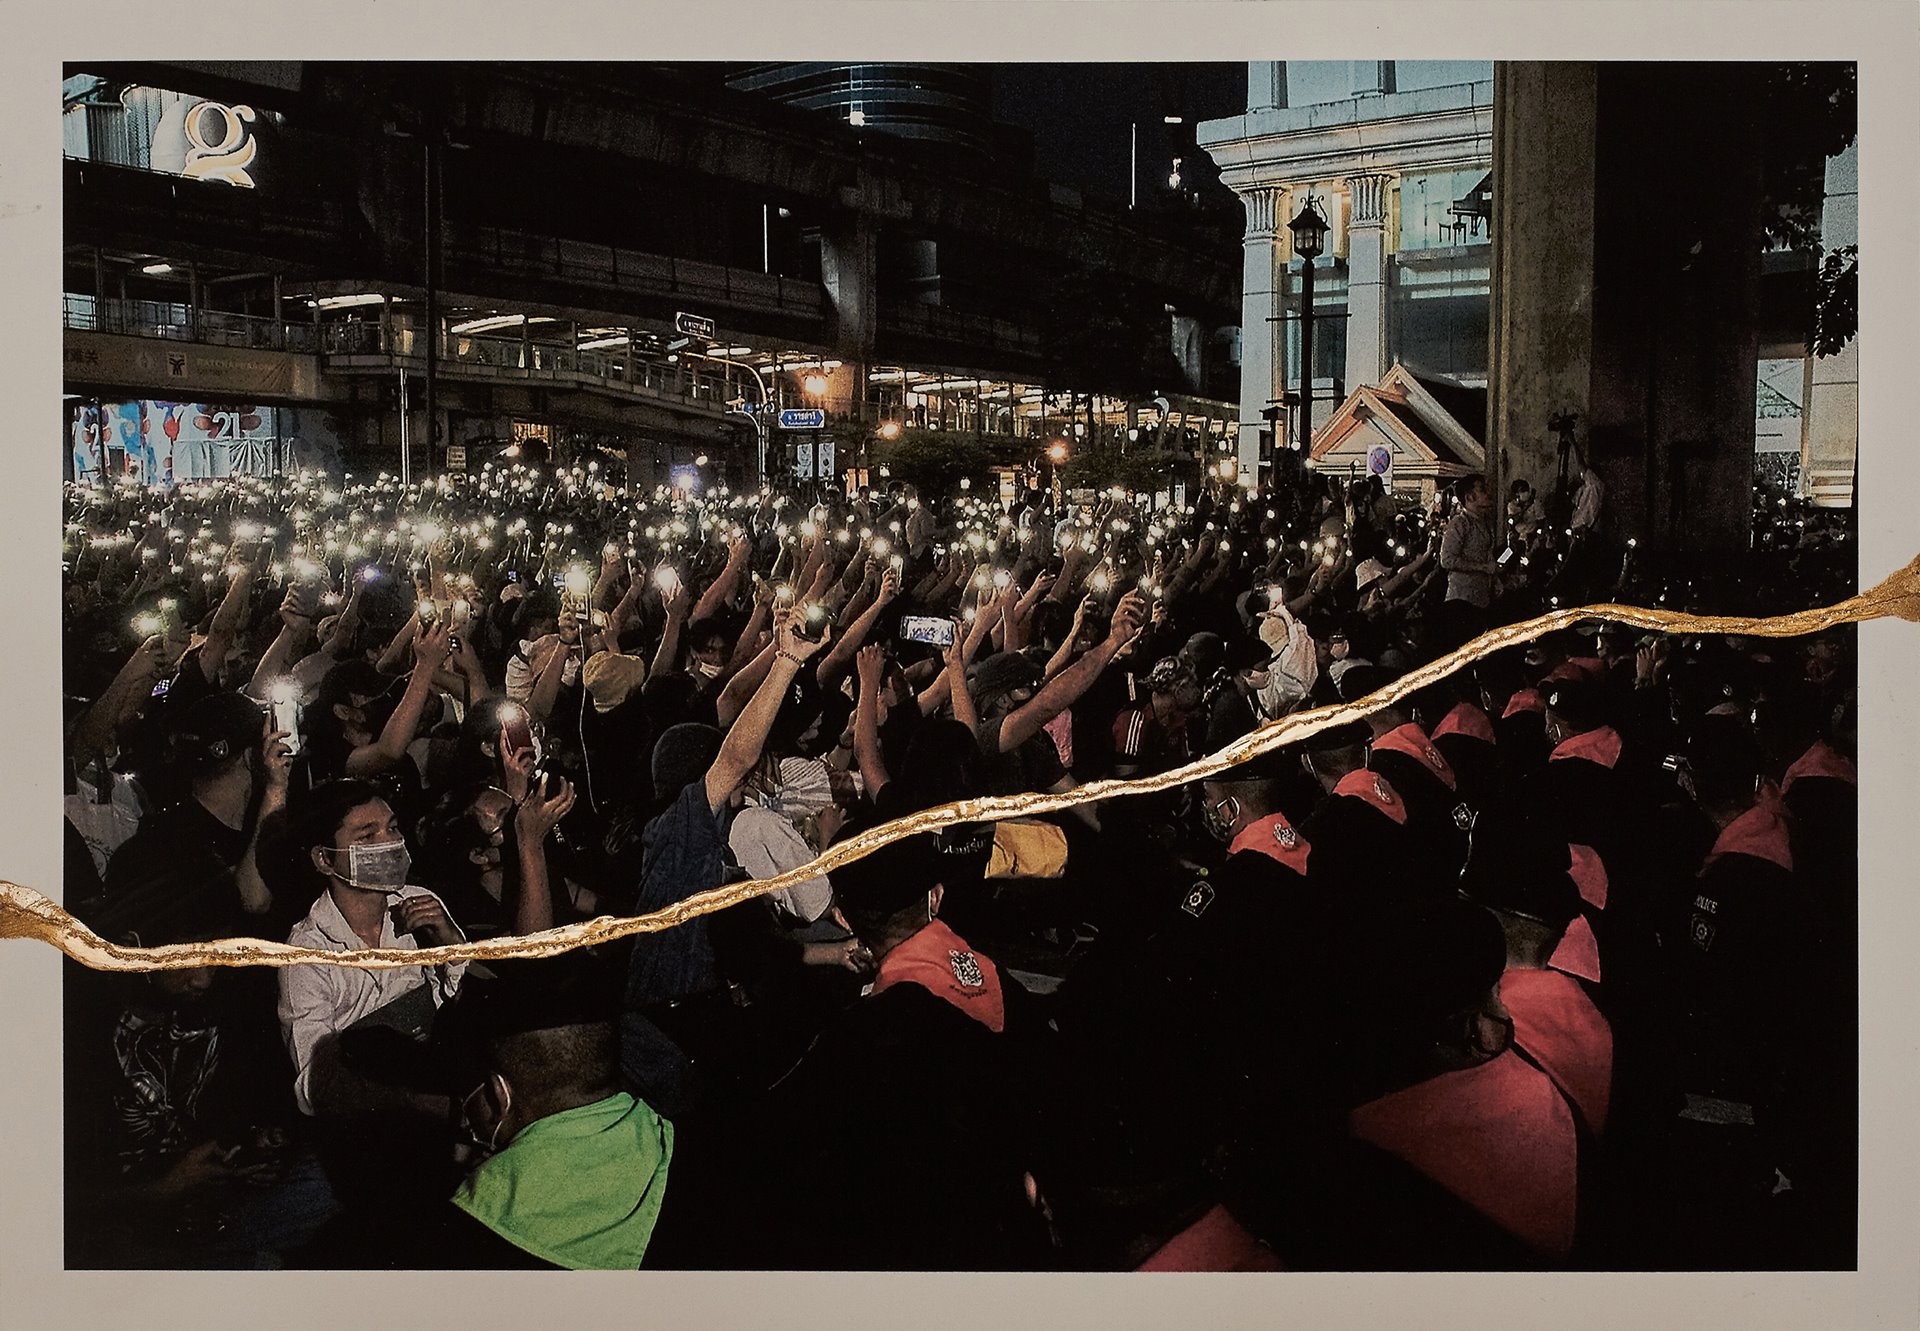 Protesters sing a song and shine the flashlights of their phones in the direction of police officers during a demonstration in Bangkok, Thailand.&nbsp;<br />
<br />
The flashlights symbolize &ldquo;shining the light for democracy.&rdquo; They also fulfill a practical purpose as police cut out public streetlights when there are protests.&nbsp;